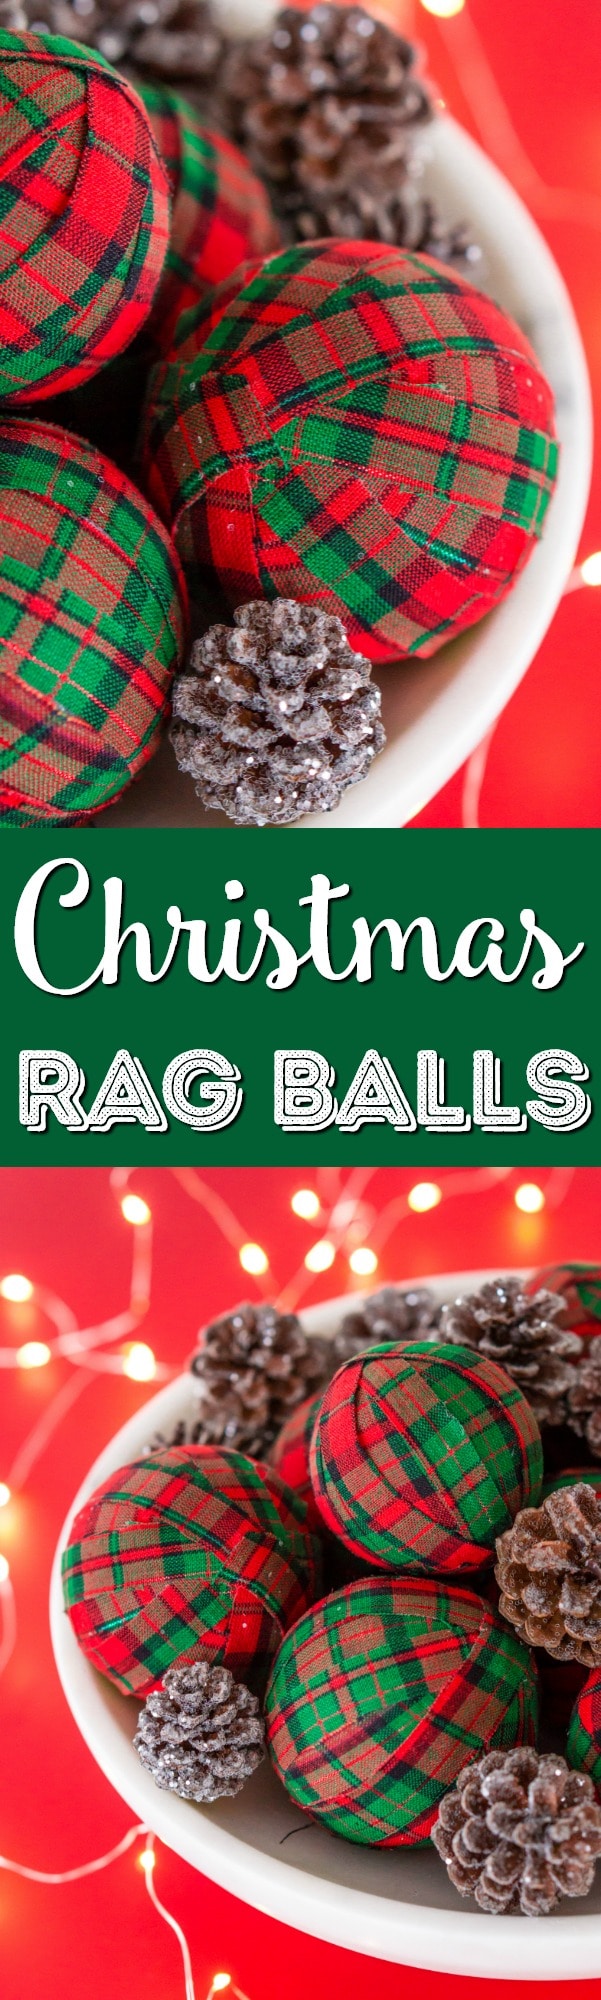 These DIY Holiday Rag Balls are a simple way to add a bit of holiday charm to your home. This craft project is super easy to make with just 4 materials! Makes great ornaments and party favors too! via @sugarandsoulco